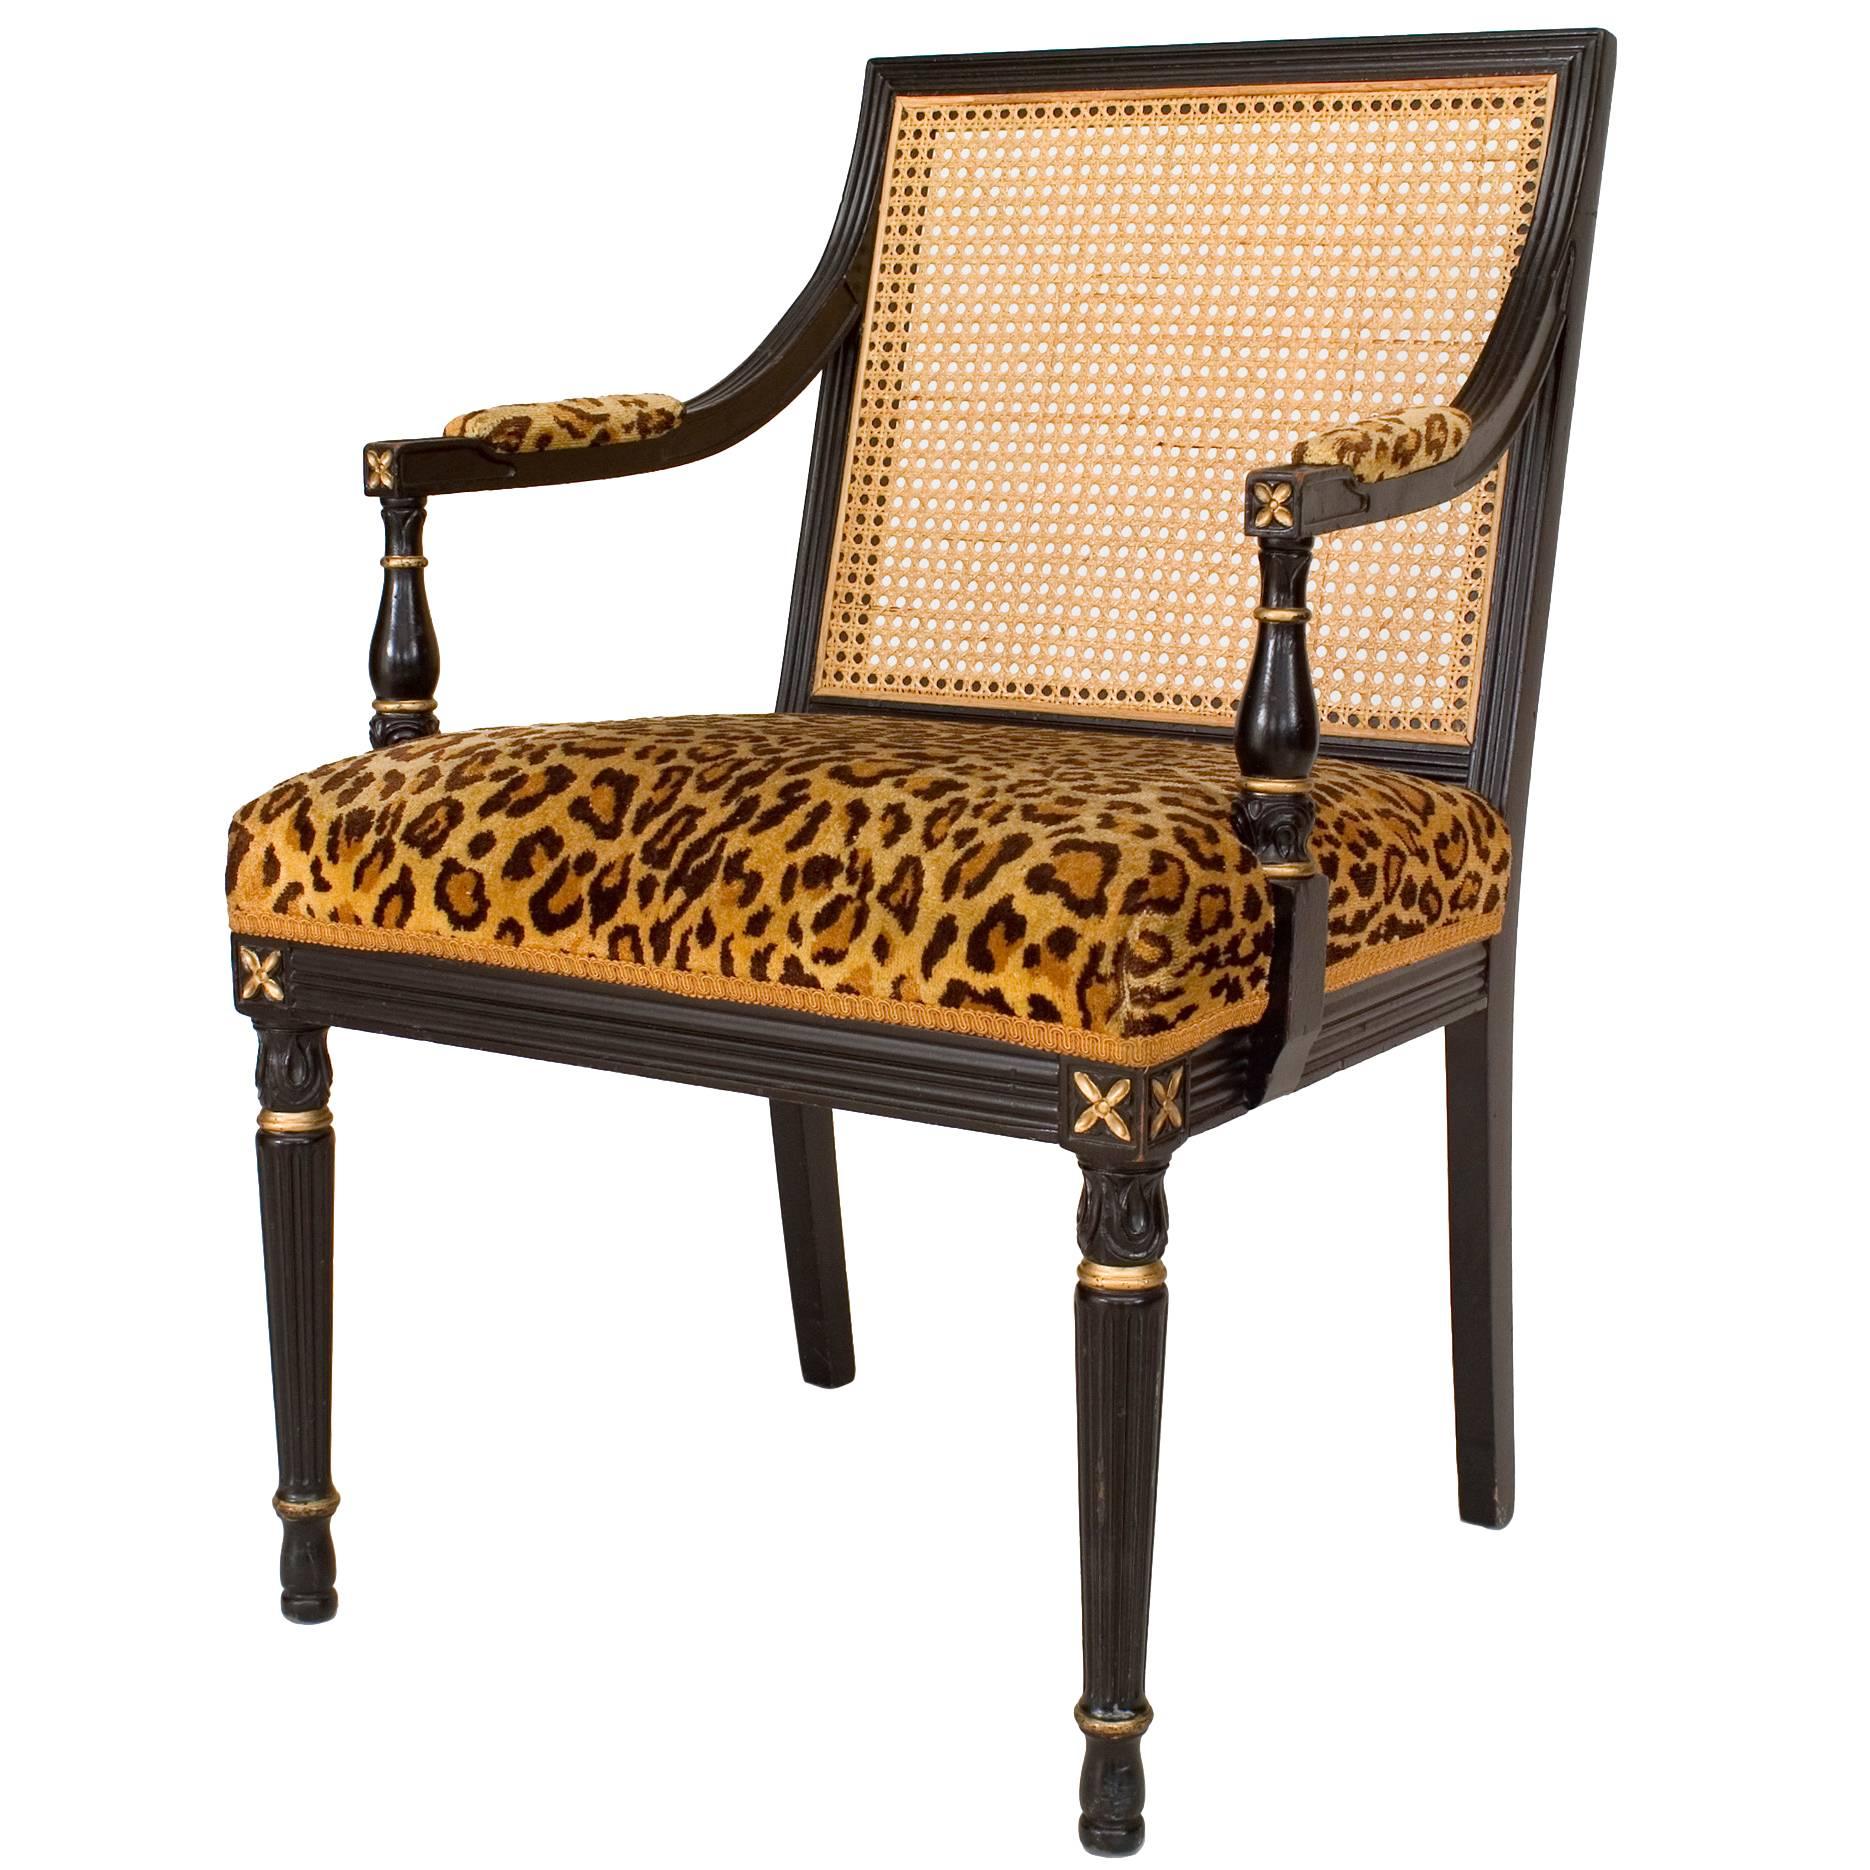 LOUIS XV ARM CHAIR FRENCH STYLE CHAIR VINTAGE FURNITURE LEOPARD BLACK WOOD 